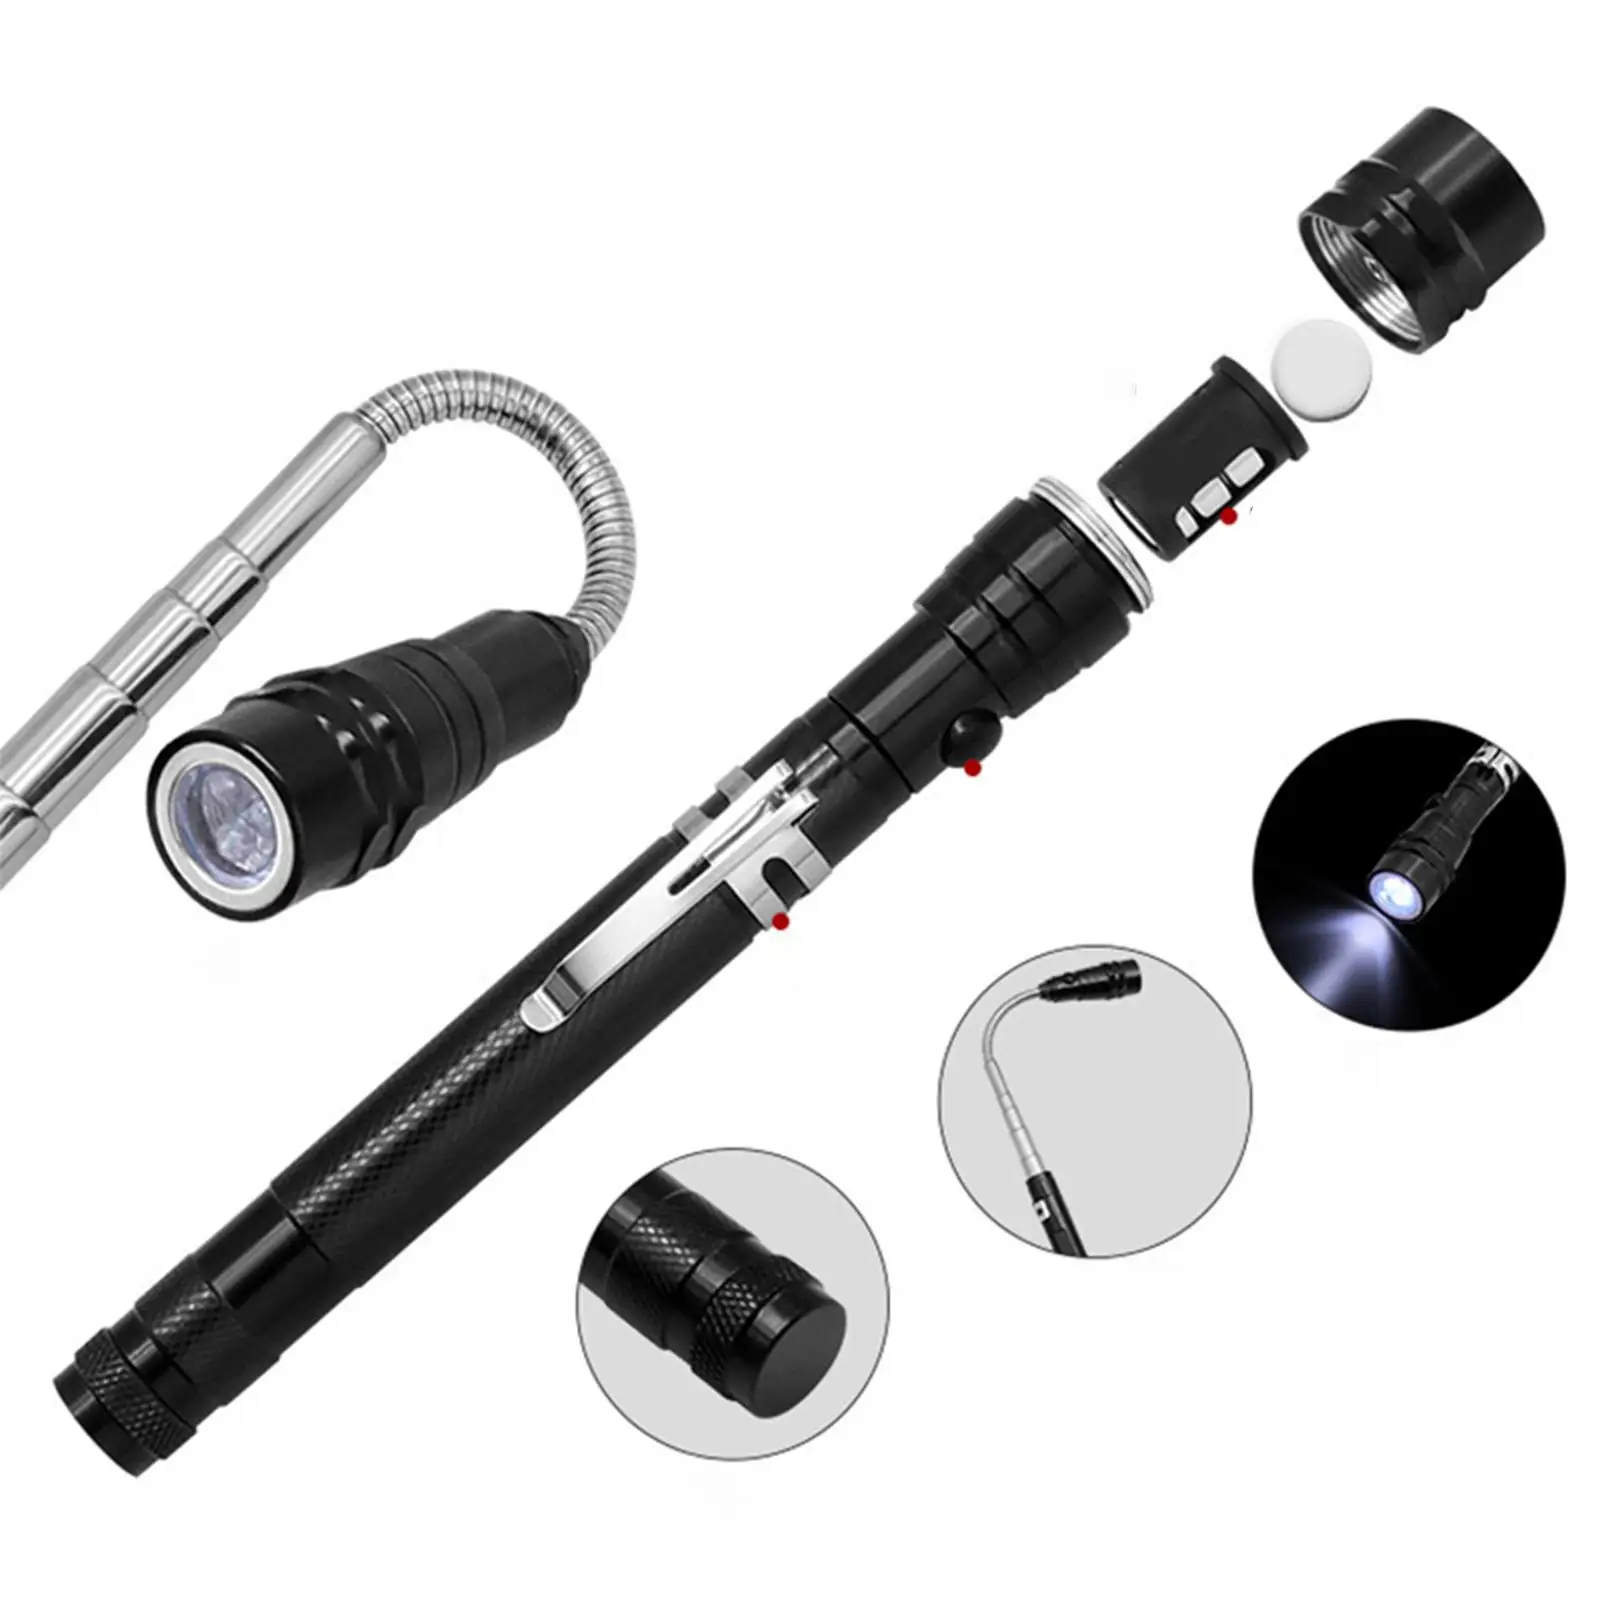 5 Pieces Magnetic Telescoping Pick up Tool Kit Flexible Flashlight Him